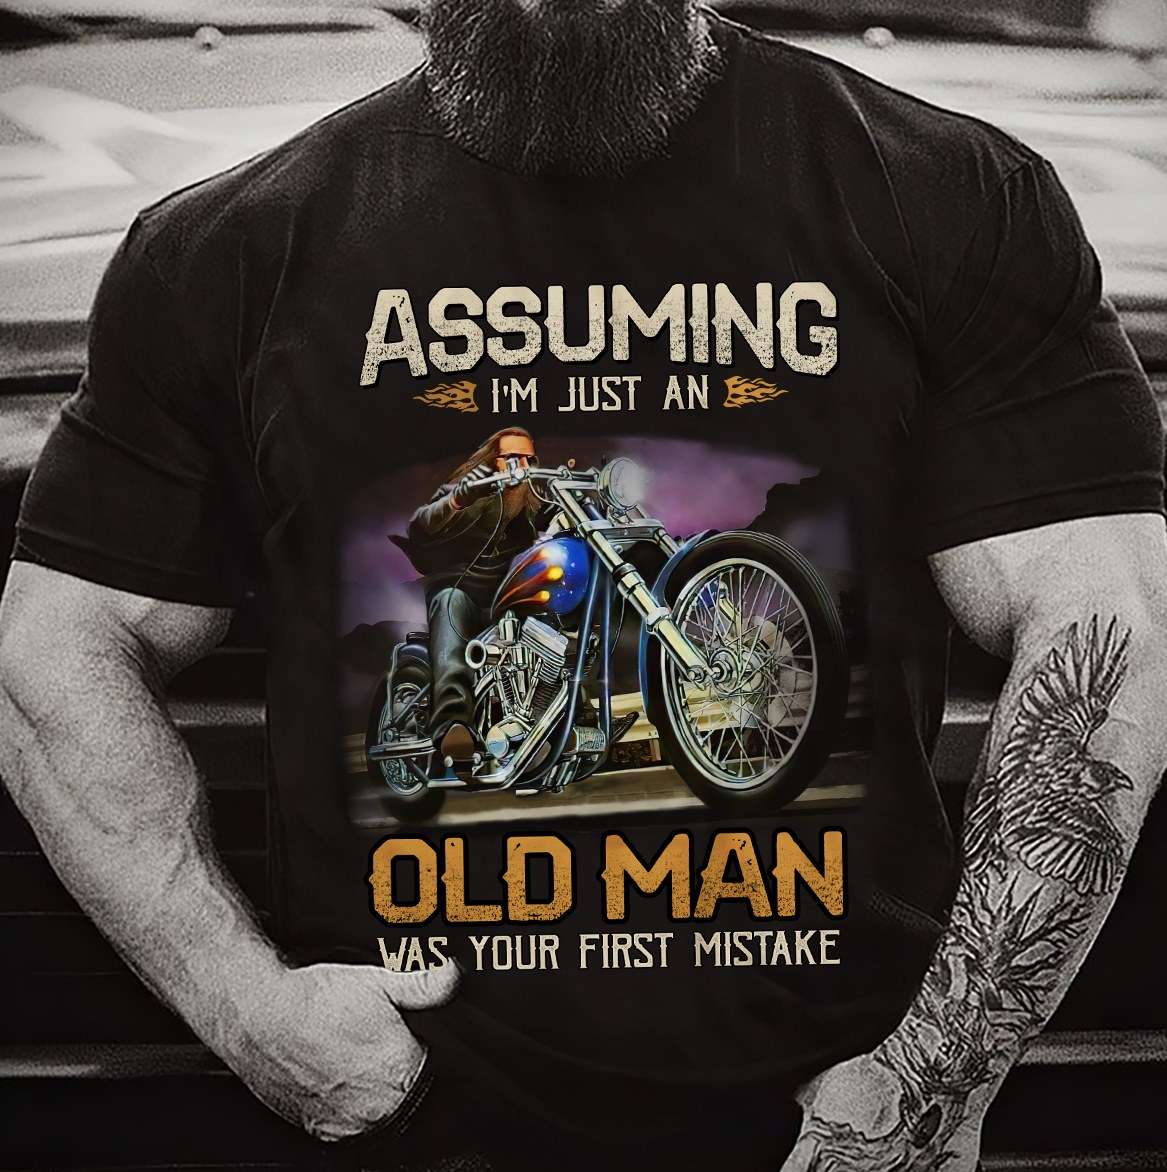 Assuing I'm just an old man was your first mistake - Old man the biker, gift for riding people